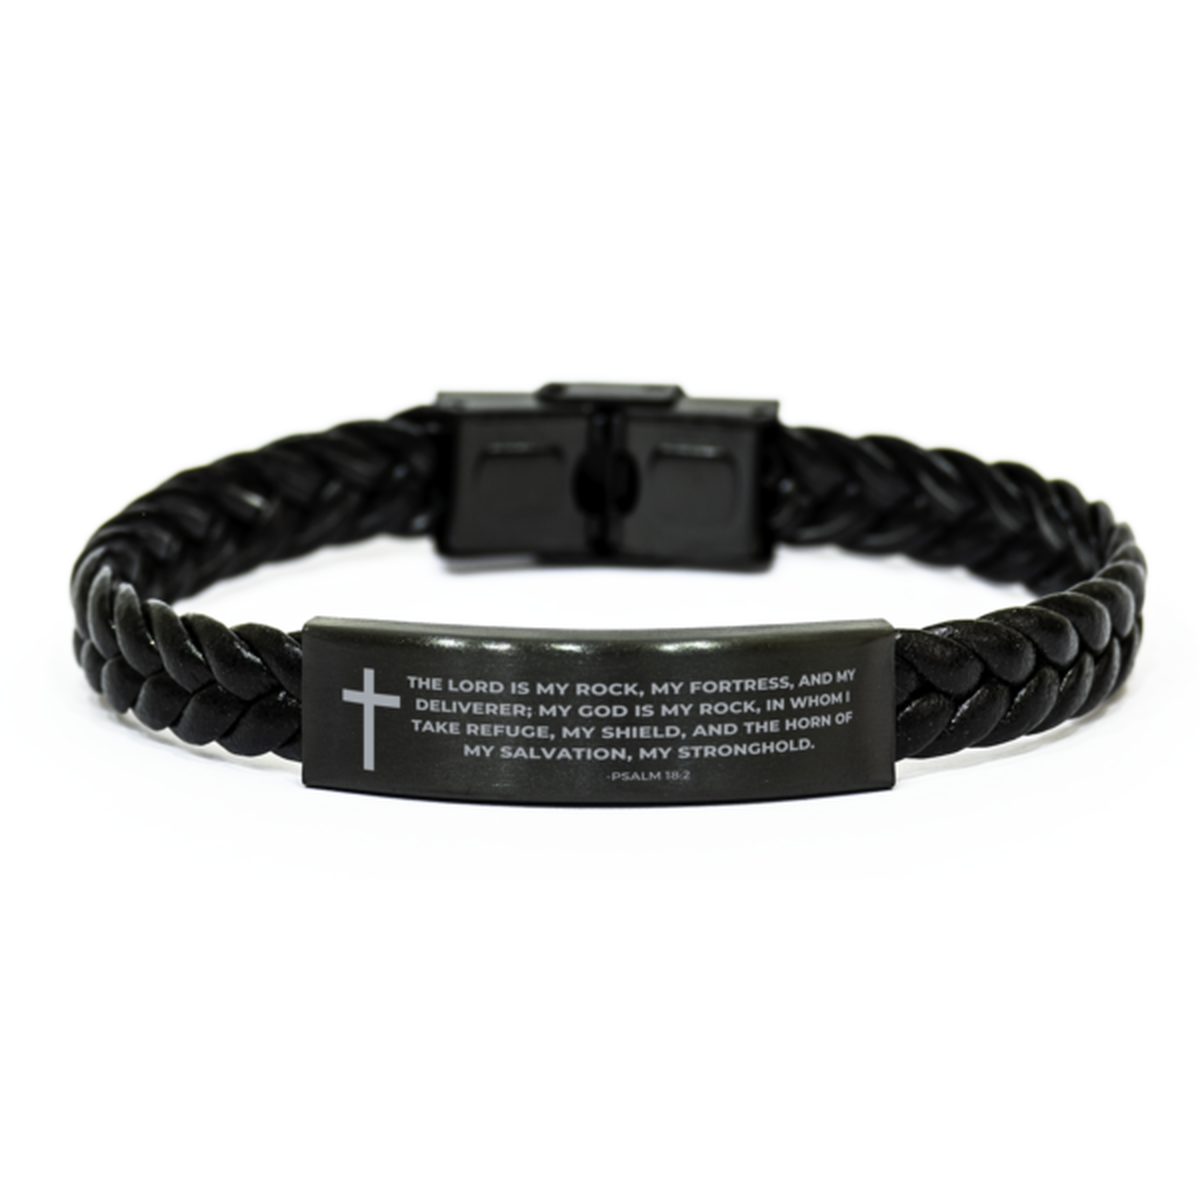 Baptism Gifts For Teenage Boys Girls, Christian Bible Verse Braided Leather Bracelet, The Lord is my rock, Catholic Confirmation Gifts for Son, Godson, Grandson, Nephew